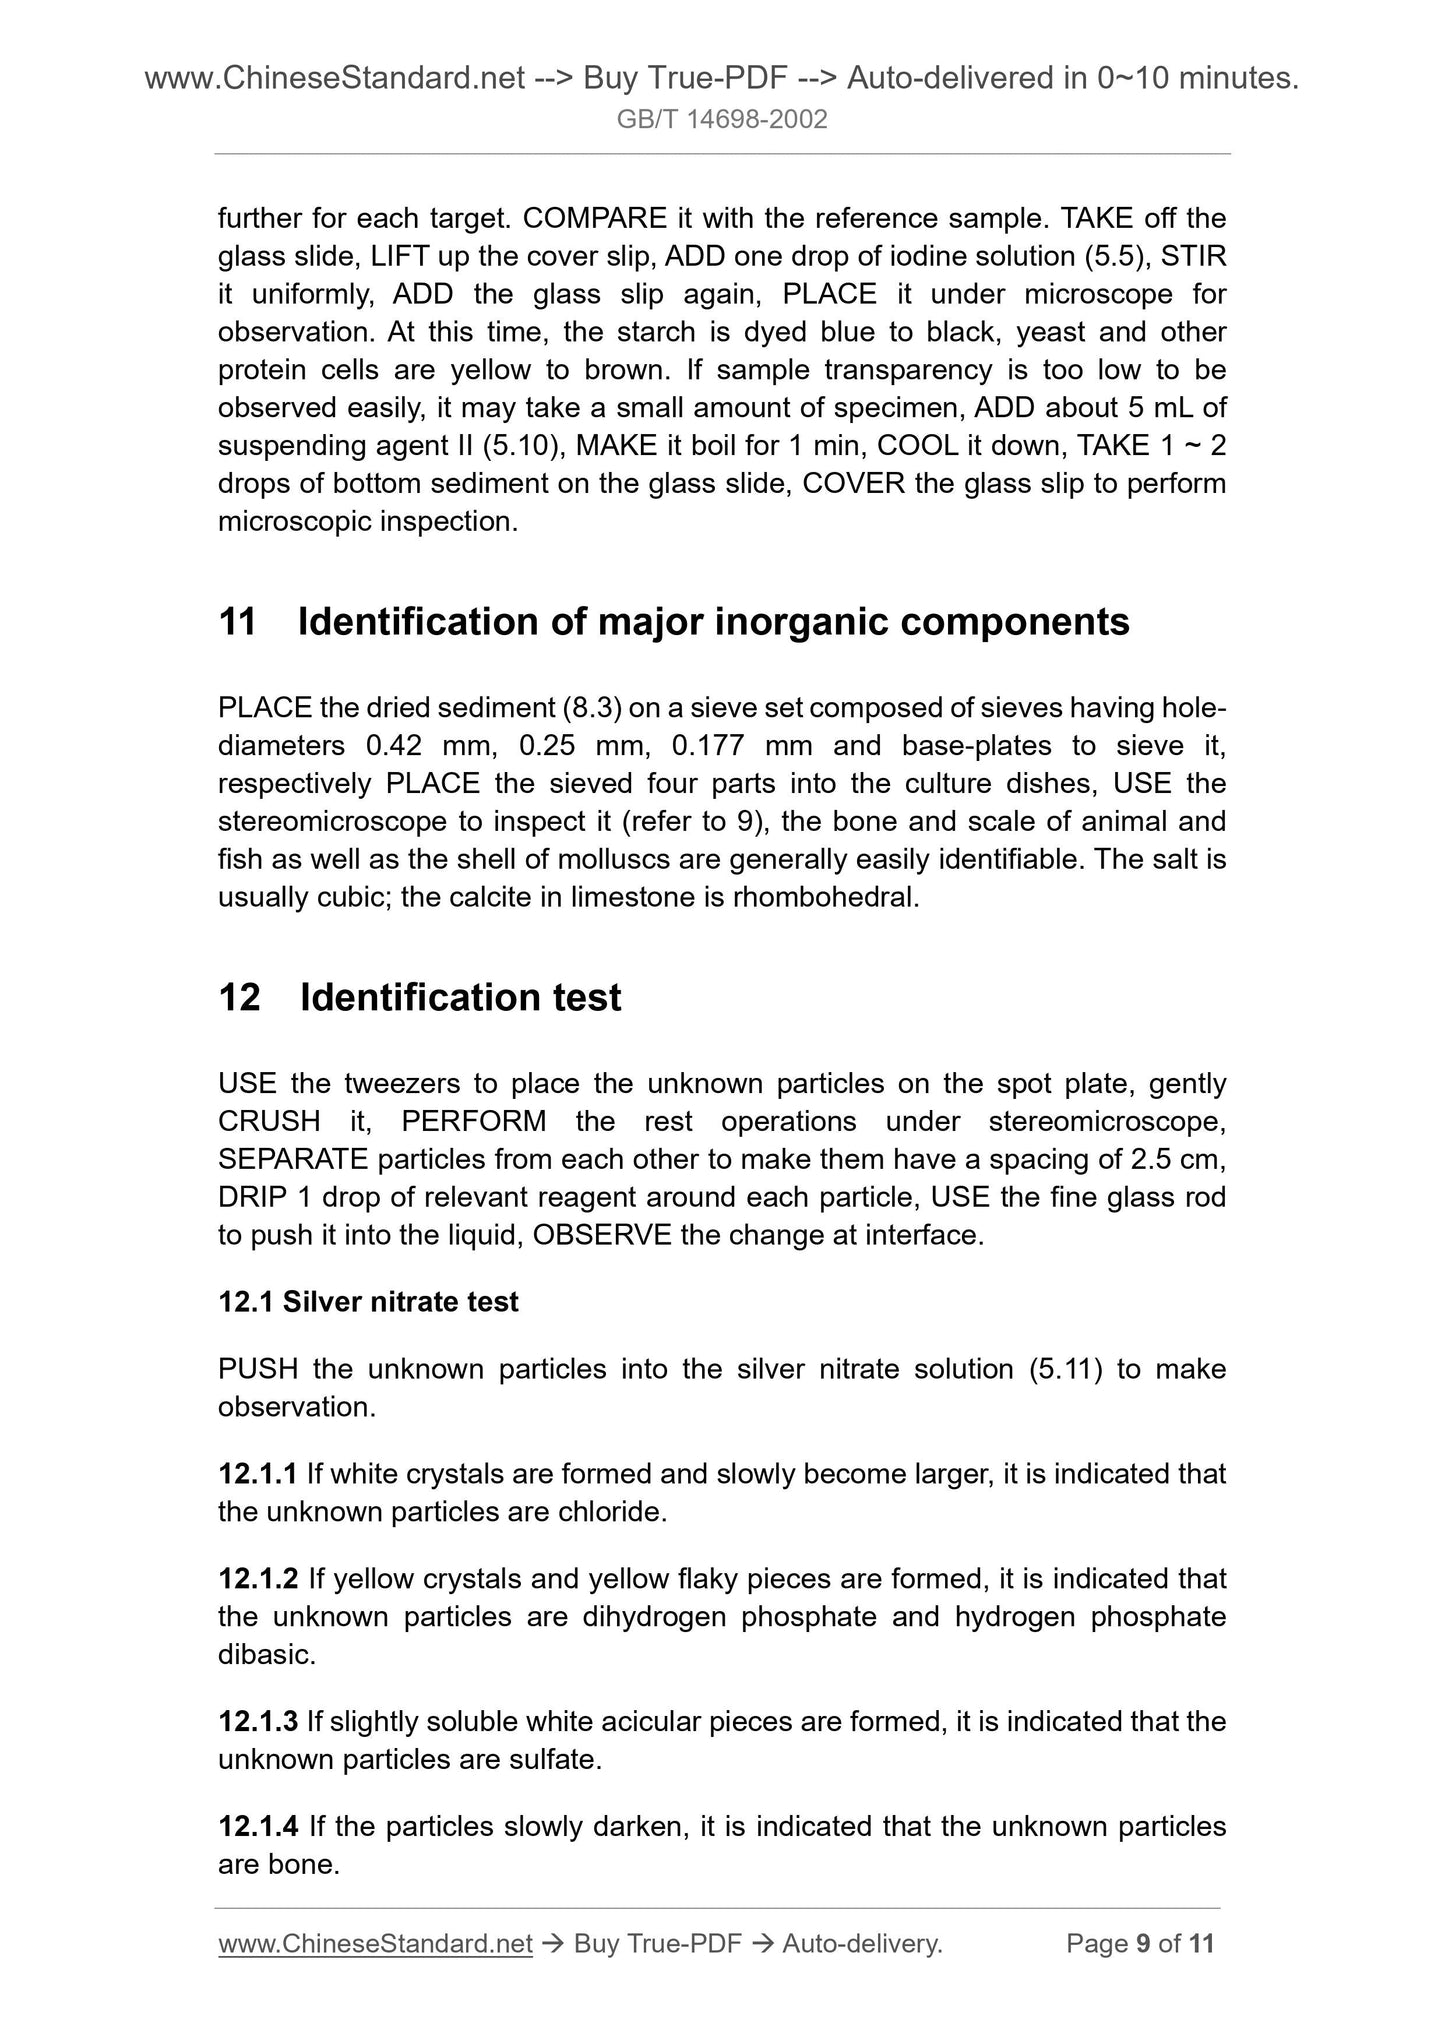 GB/T 14698-2002 Page 6